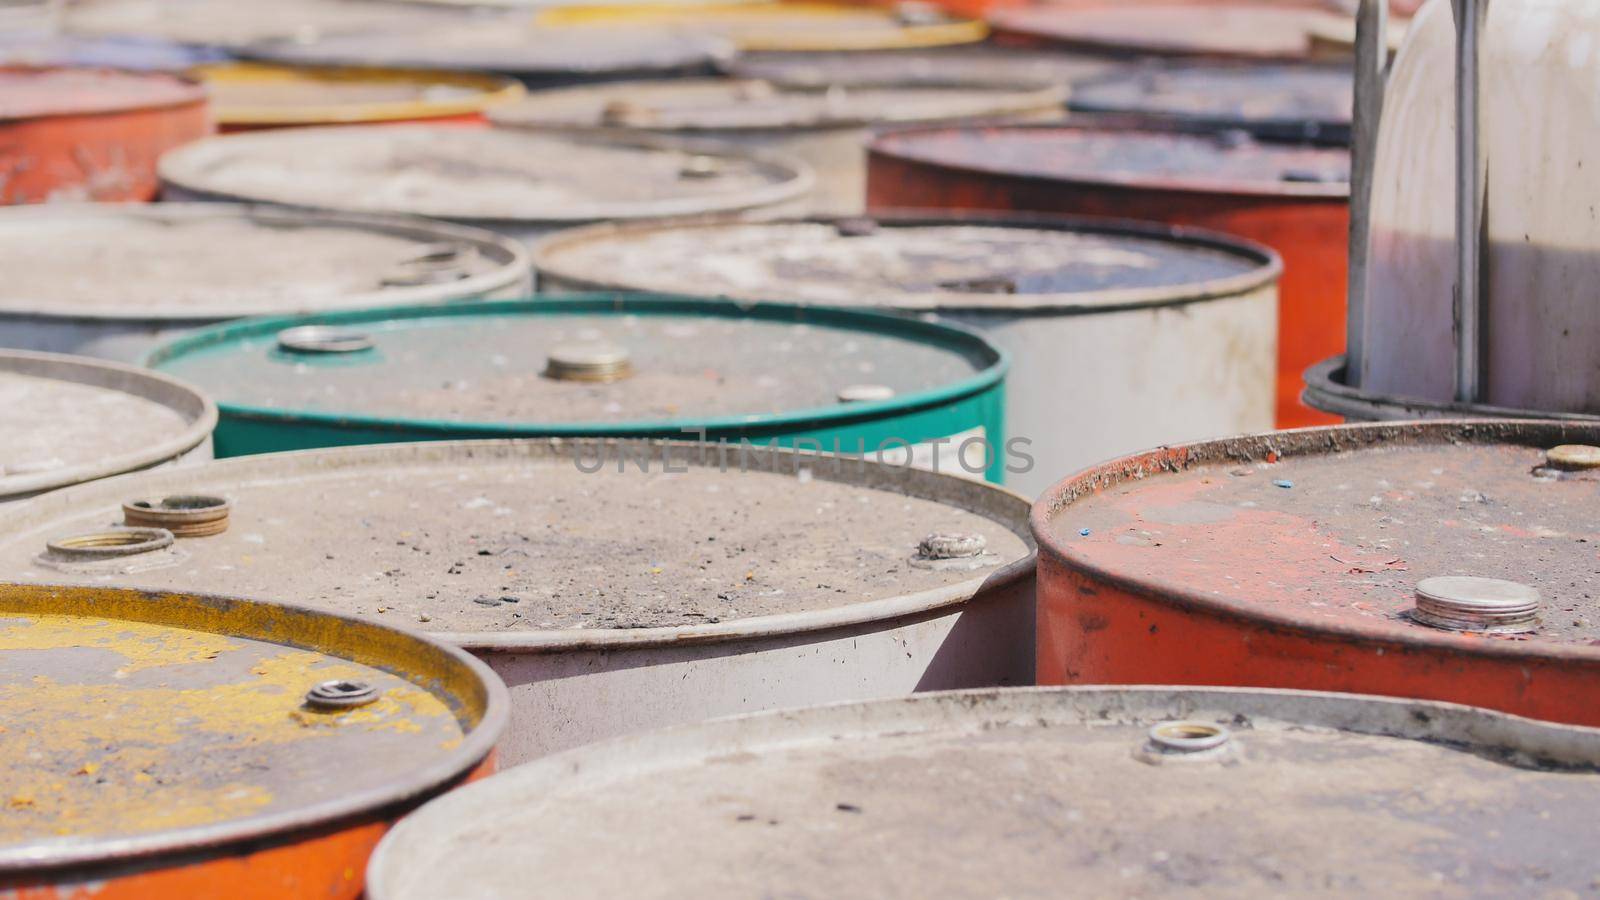 On the territory of the processing plant there are dirty barrels with the used oil